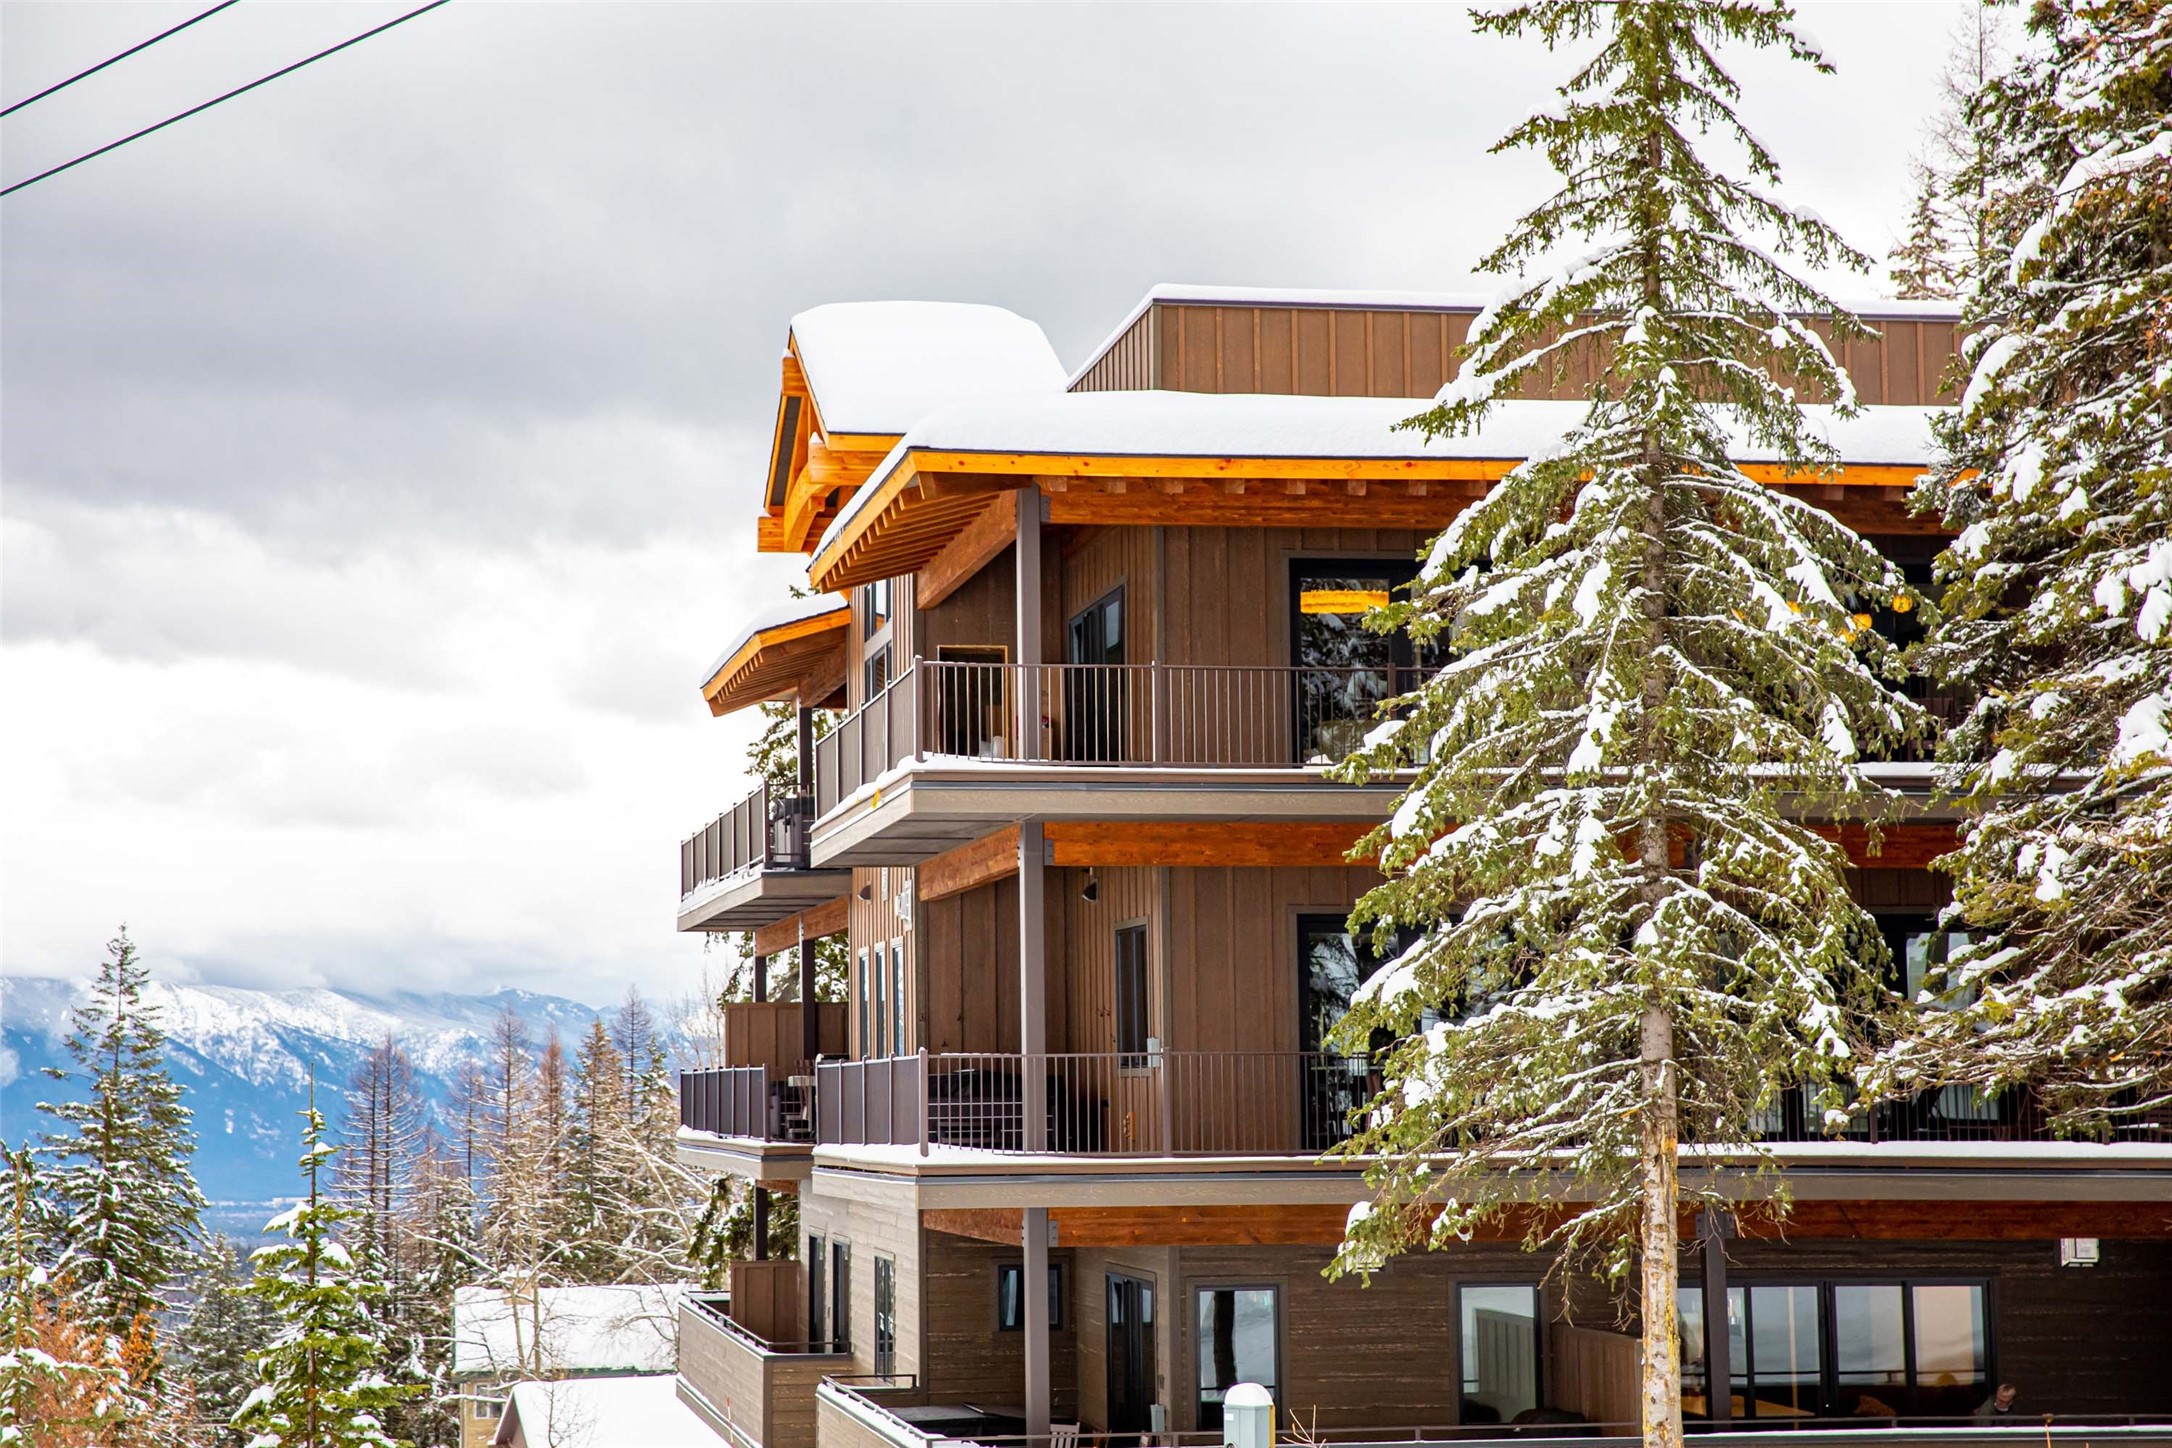 Ski-in, ski-out of this fabulous slope side condo at Whitefish Mountain Resort! Built in 2020 and immaculately maintained, this fully furnished condo is ready for your immediate enjoyment or to rent out short-term as an investment asset. 3 bedrooms with ensuite baths and a powder room offer plenty of space for guests. An open floor plan utilizes the large space beautifully and opens onto a wraparound deck with a hot tub to relax after a day of skiing. In-floor heating in the bathrooms, central AC and heat throughout, wonderfully appointed furnishings and high-end appliances are a few of the perks inside the condo. Lovely views from the large windows overlooking the ski hill and direct access to the slopes will have you enjoying your vacation in style. A fitness center, ski locker room, and heated garage with owner's storage area are a few of the amenities available to you. Please call Matt Zignego at 406-212-2792 or your real estate professional for more info or to schedule a showing.